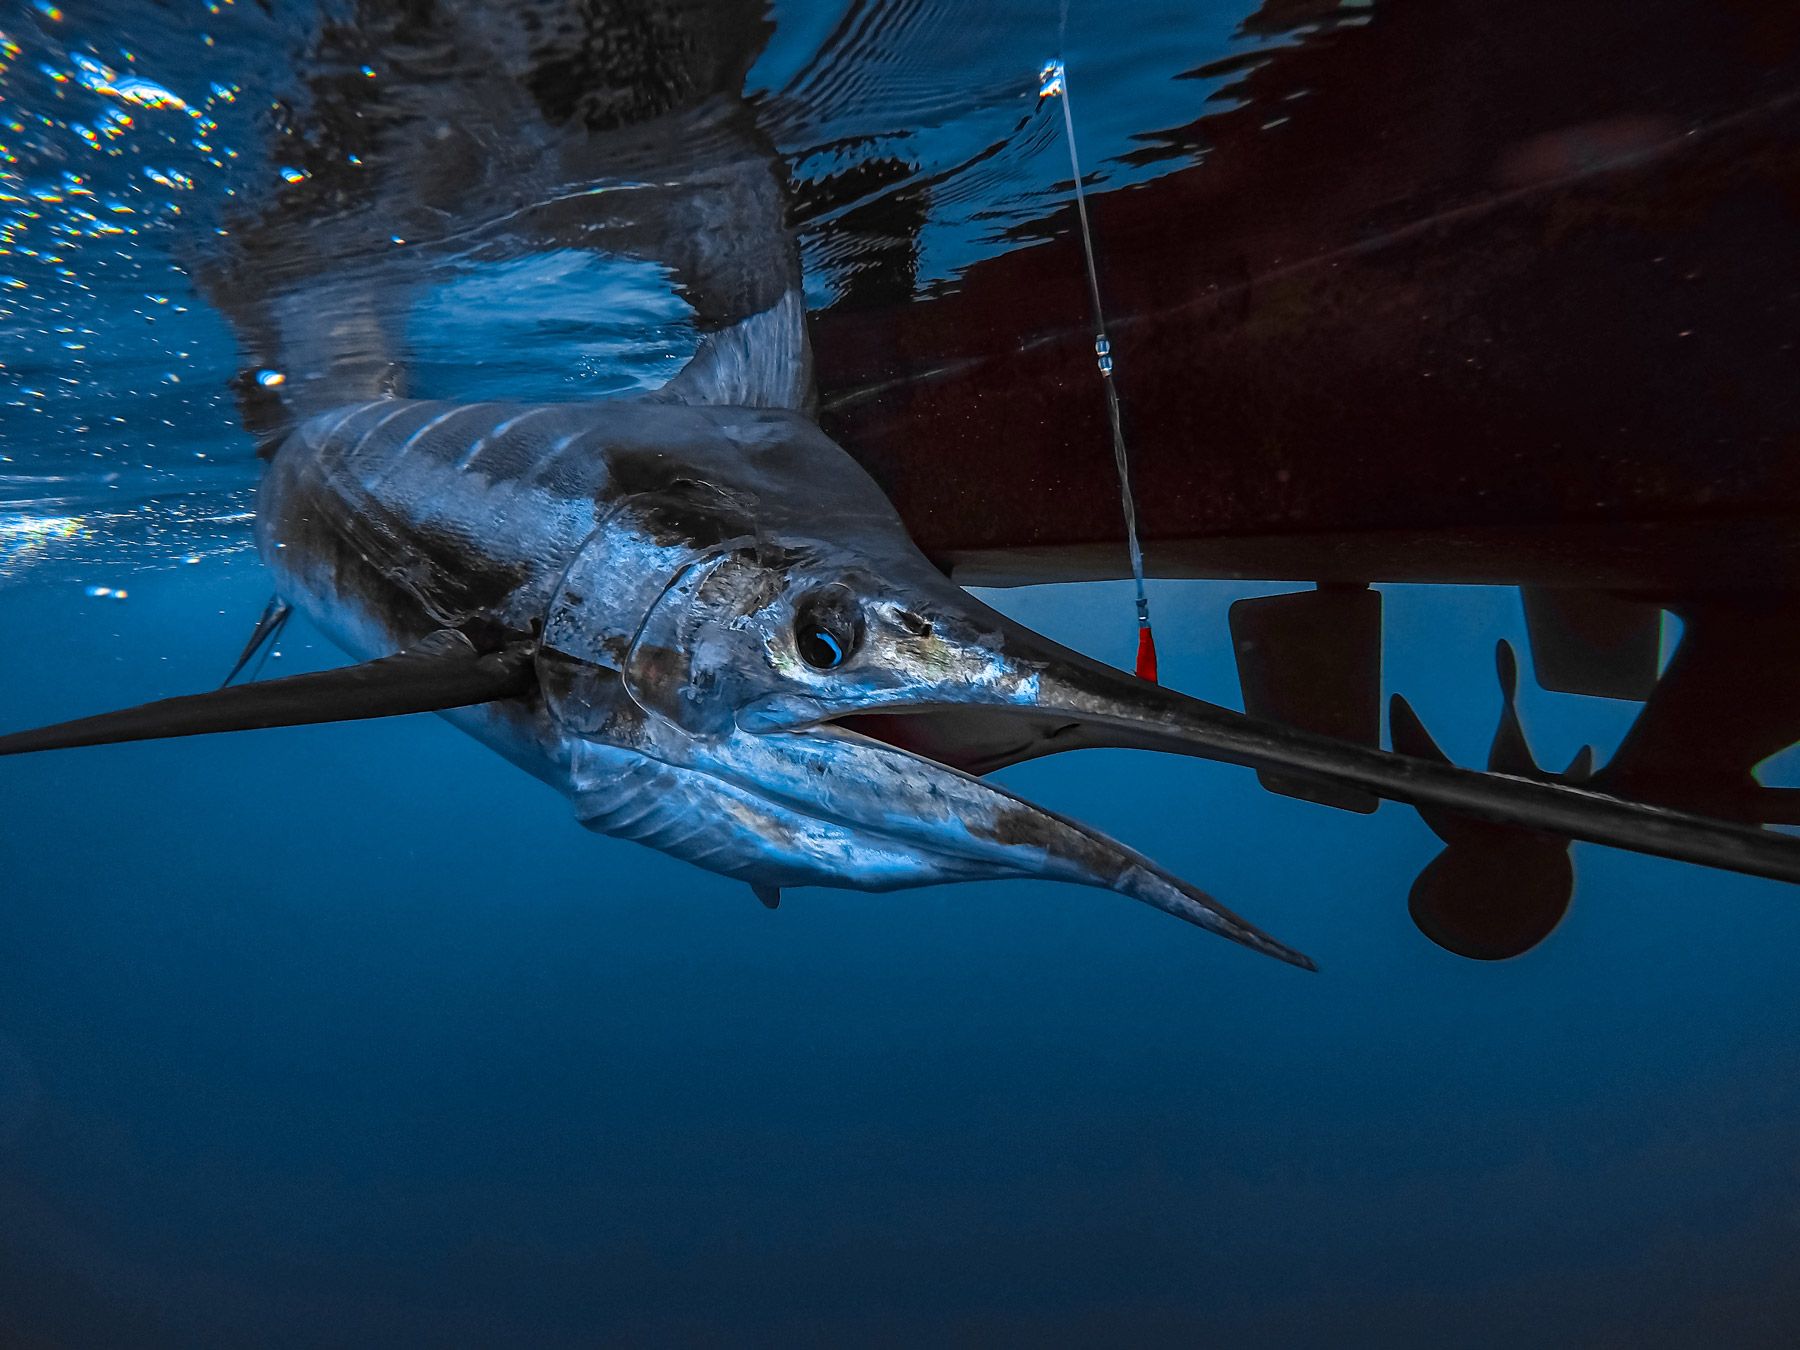 White Marlin Fishing: species guide, charters and destinations - Tom's Catch